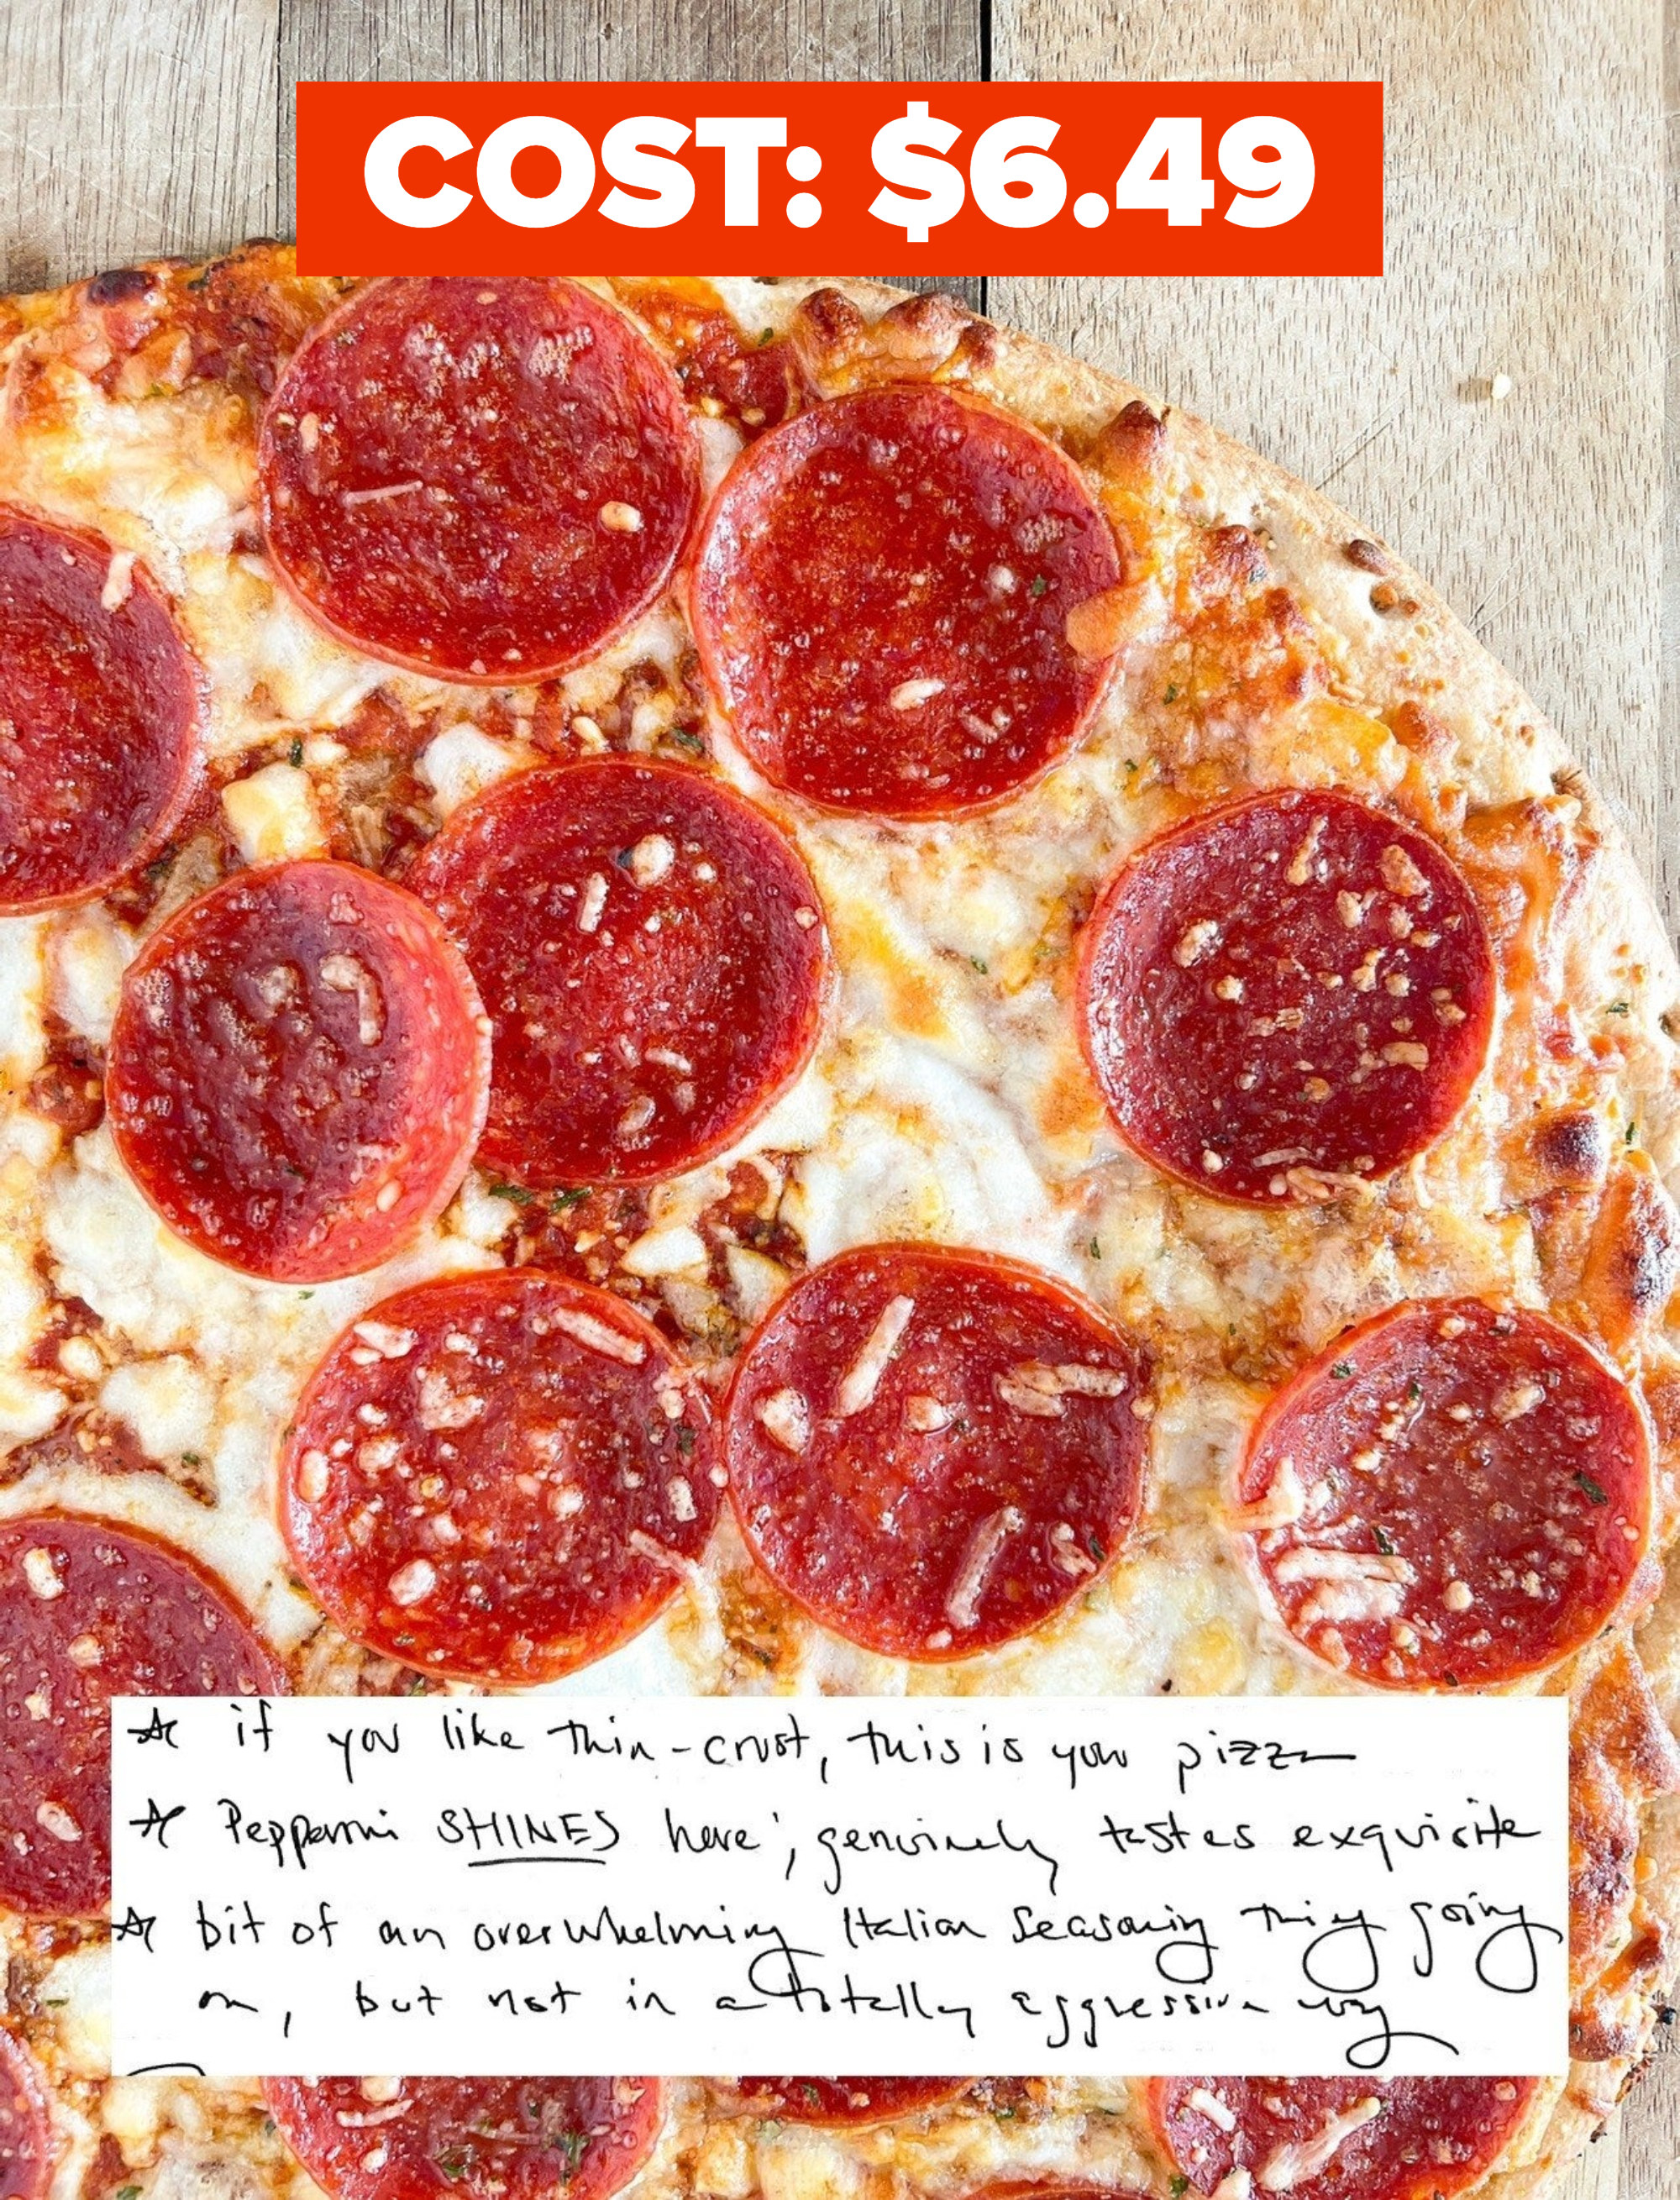 Newman&#x27;s Own pepperoni pizza that costs $6.49 with author&#x27;s handwritten notes